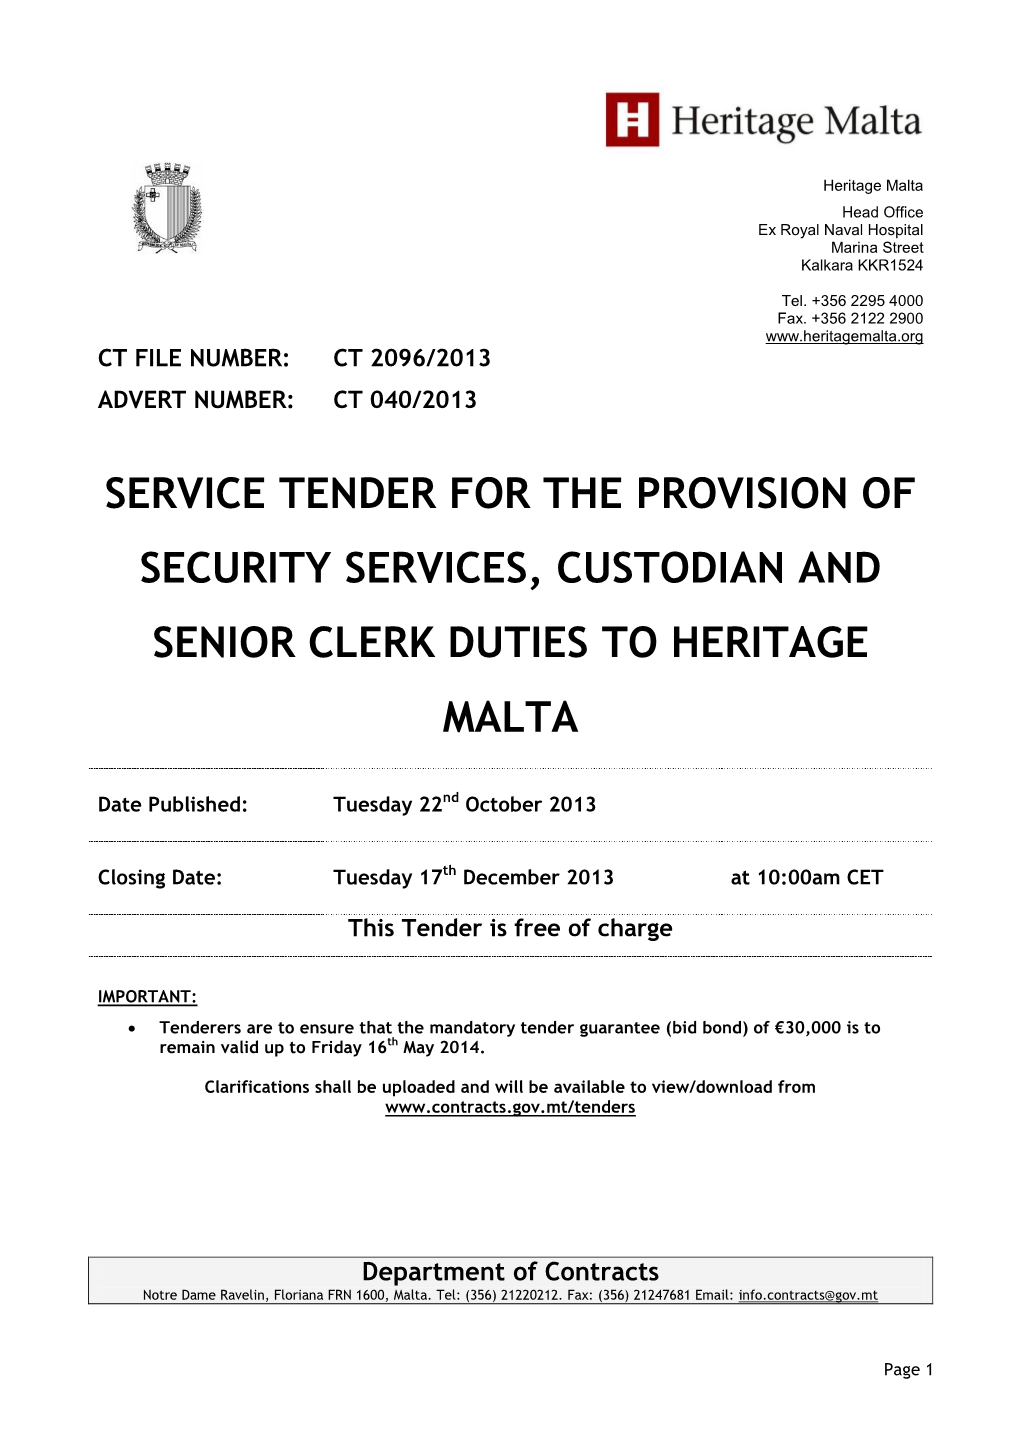 Services Tender